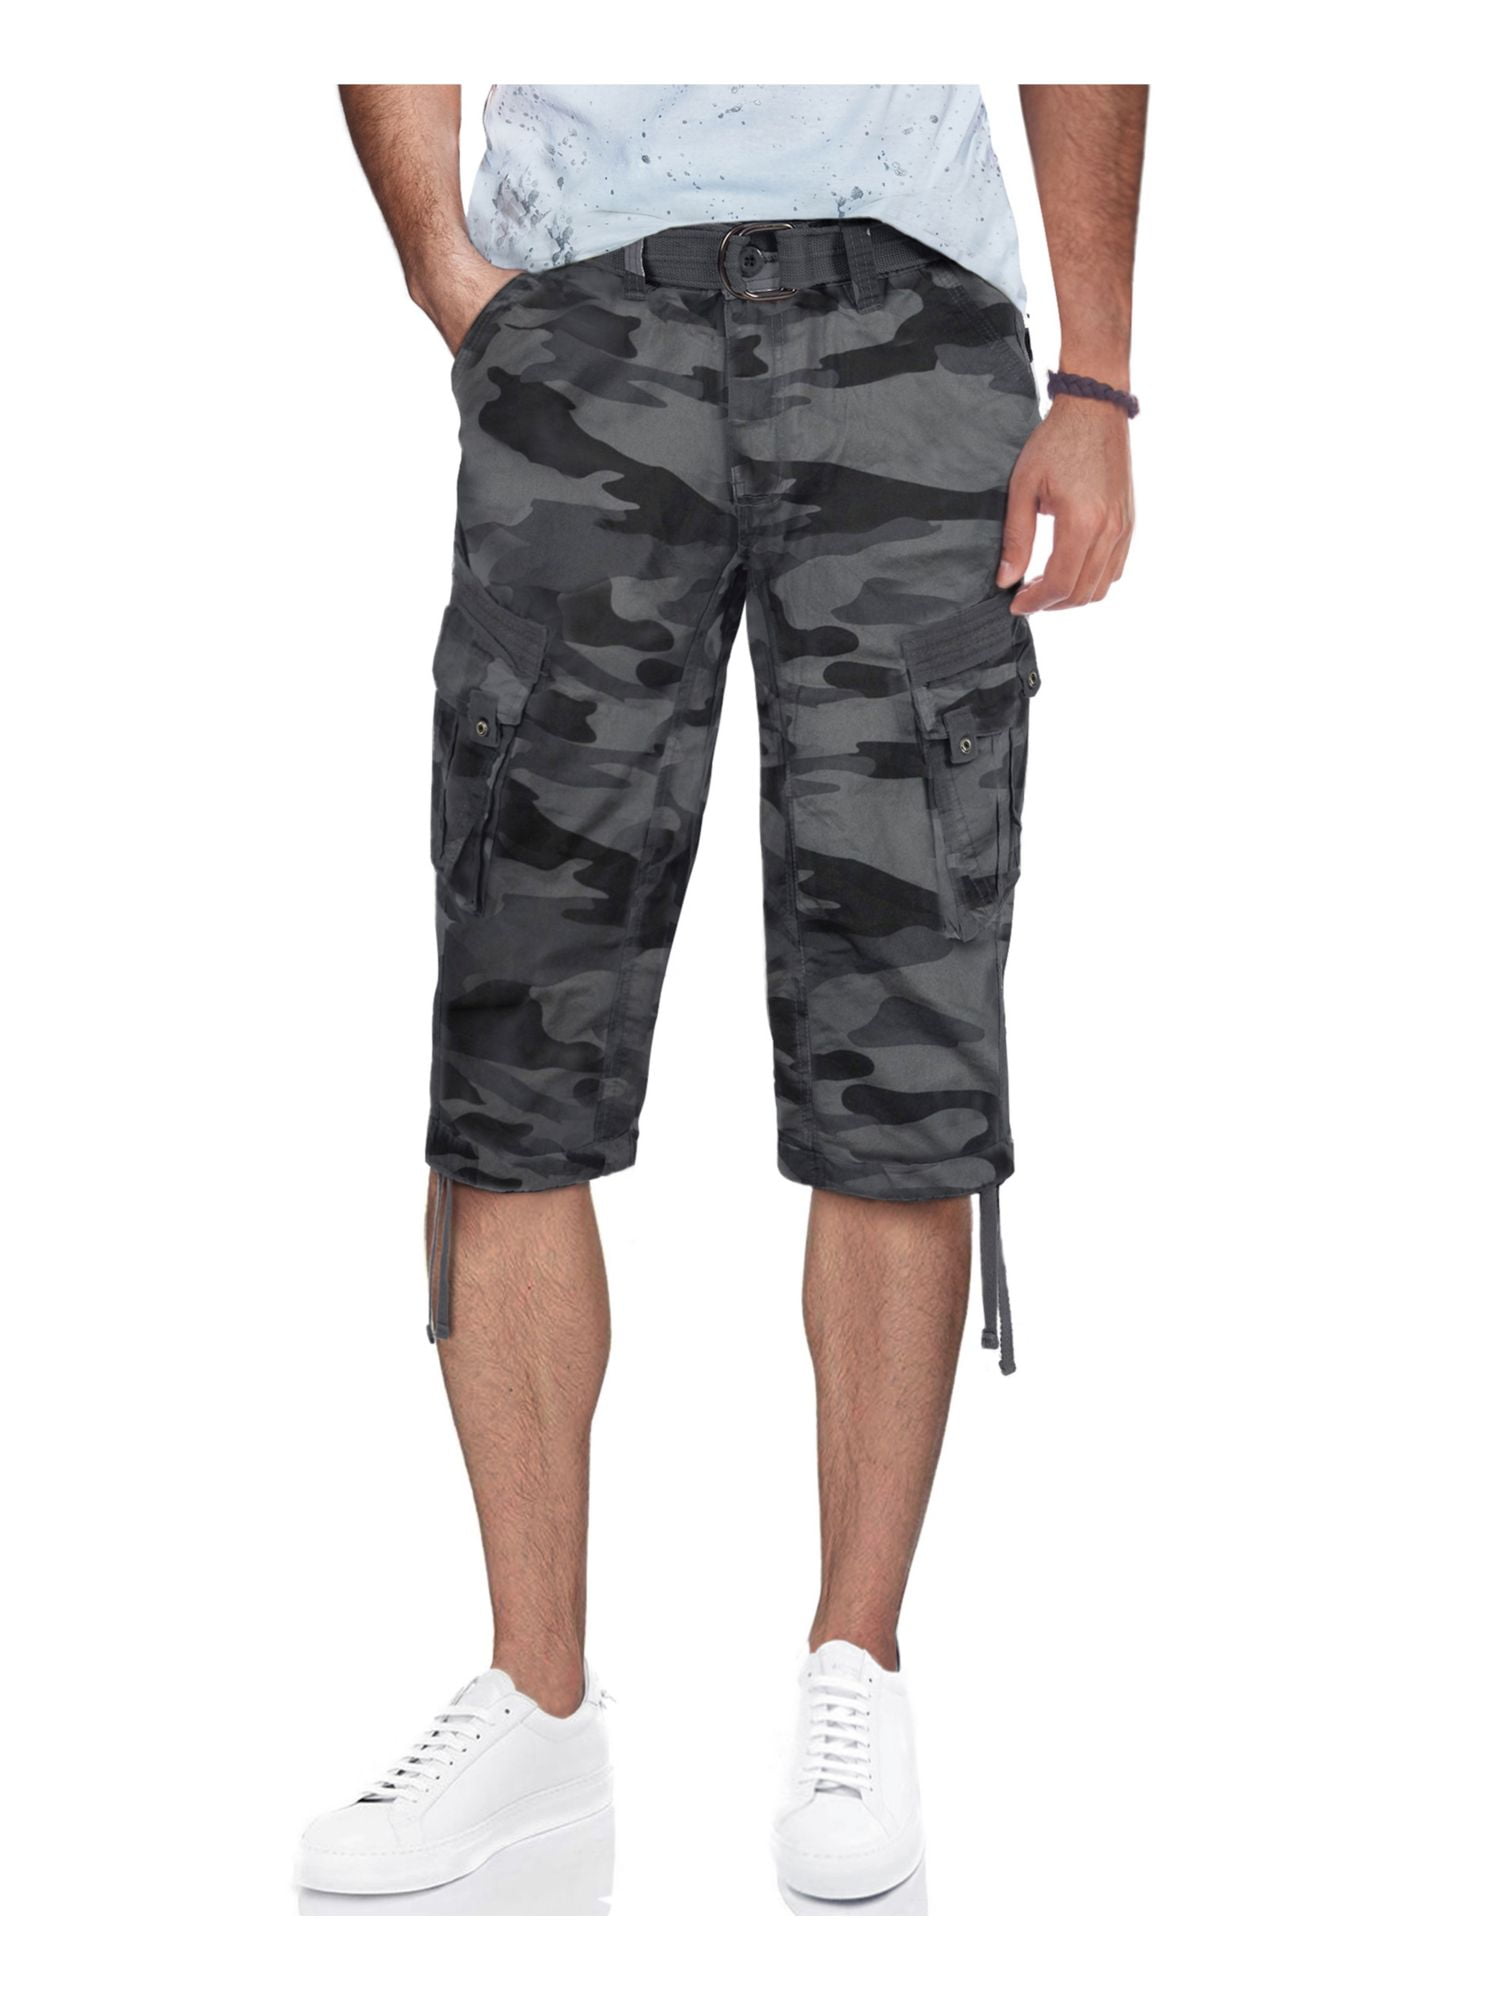 Muscle Alive Men Vintage Cargo Shorts Relaxed Fit Sports Camping Hiking Camouflage Shorts Cotton 